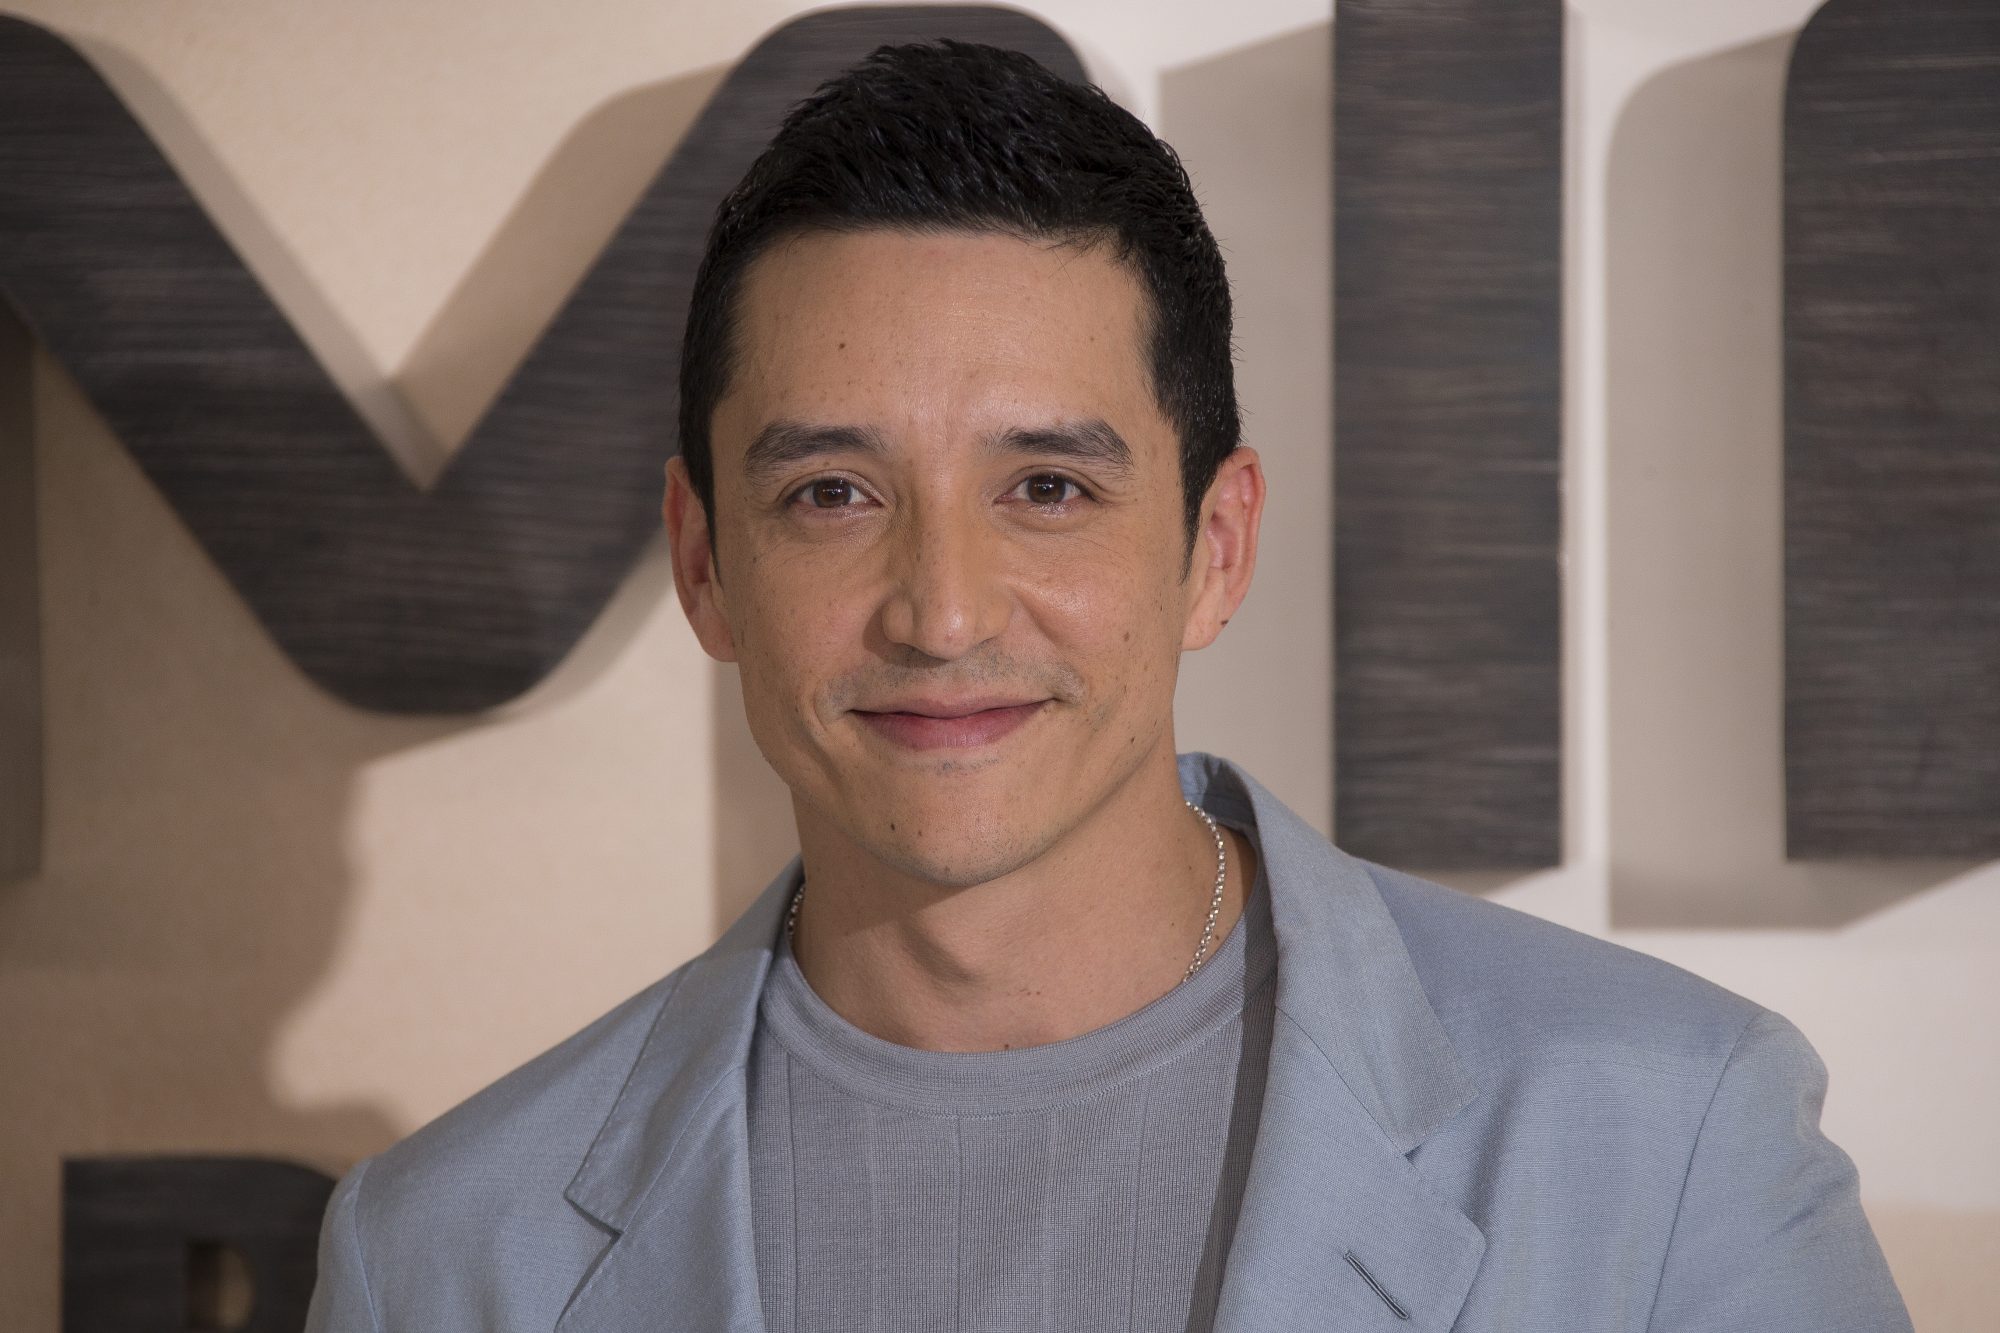 WHO???? THE LAST OF US CAST GABRIEL LUNA AS TOMMY MILLER!!! 